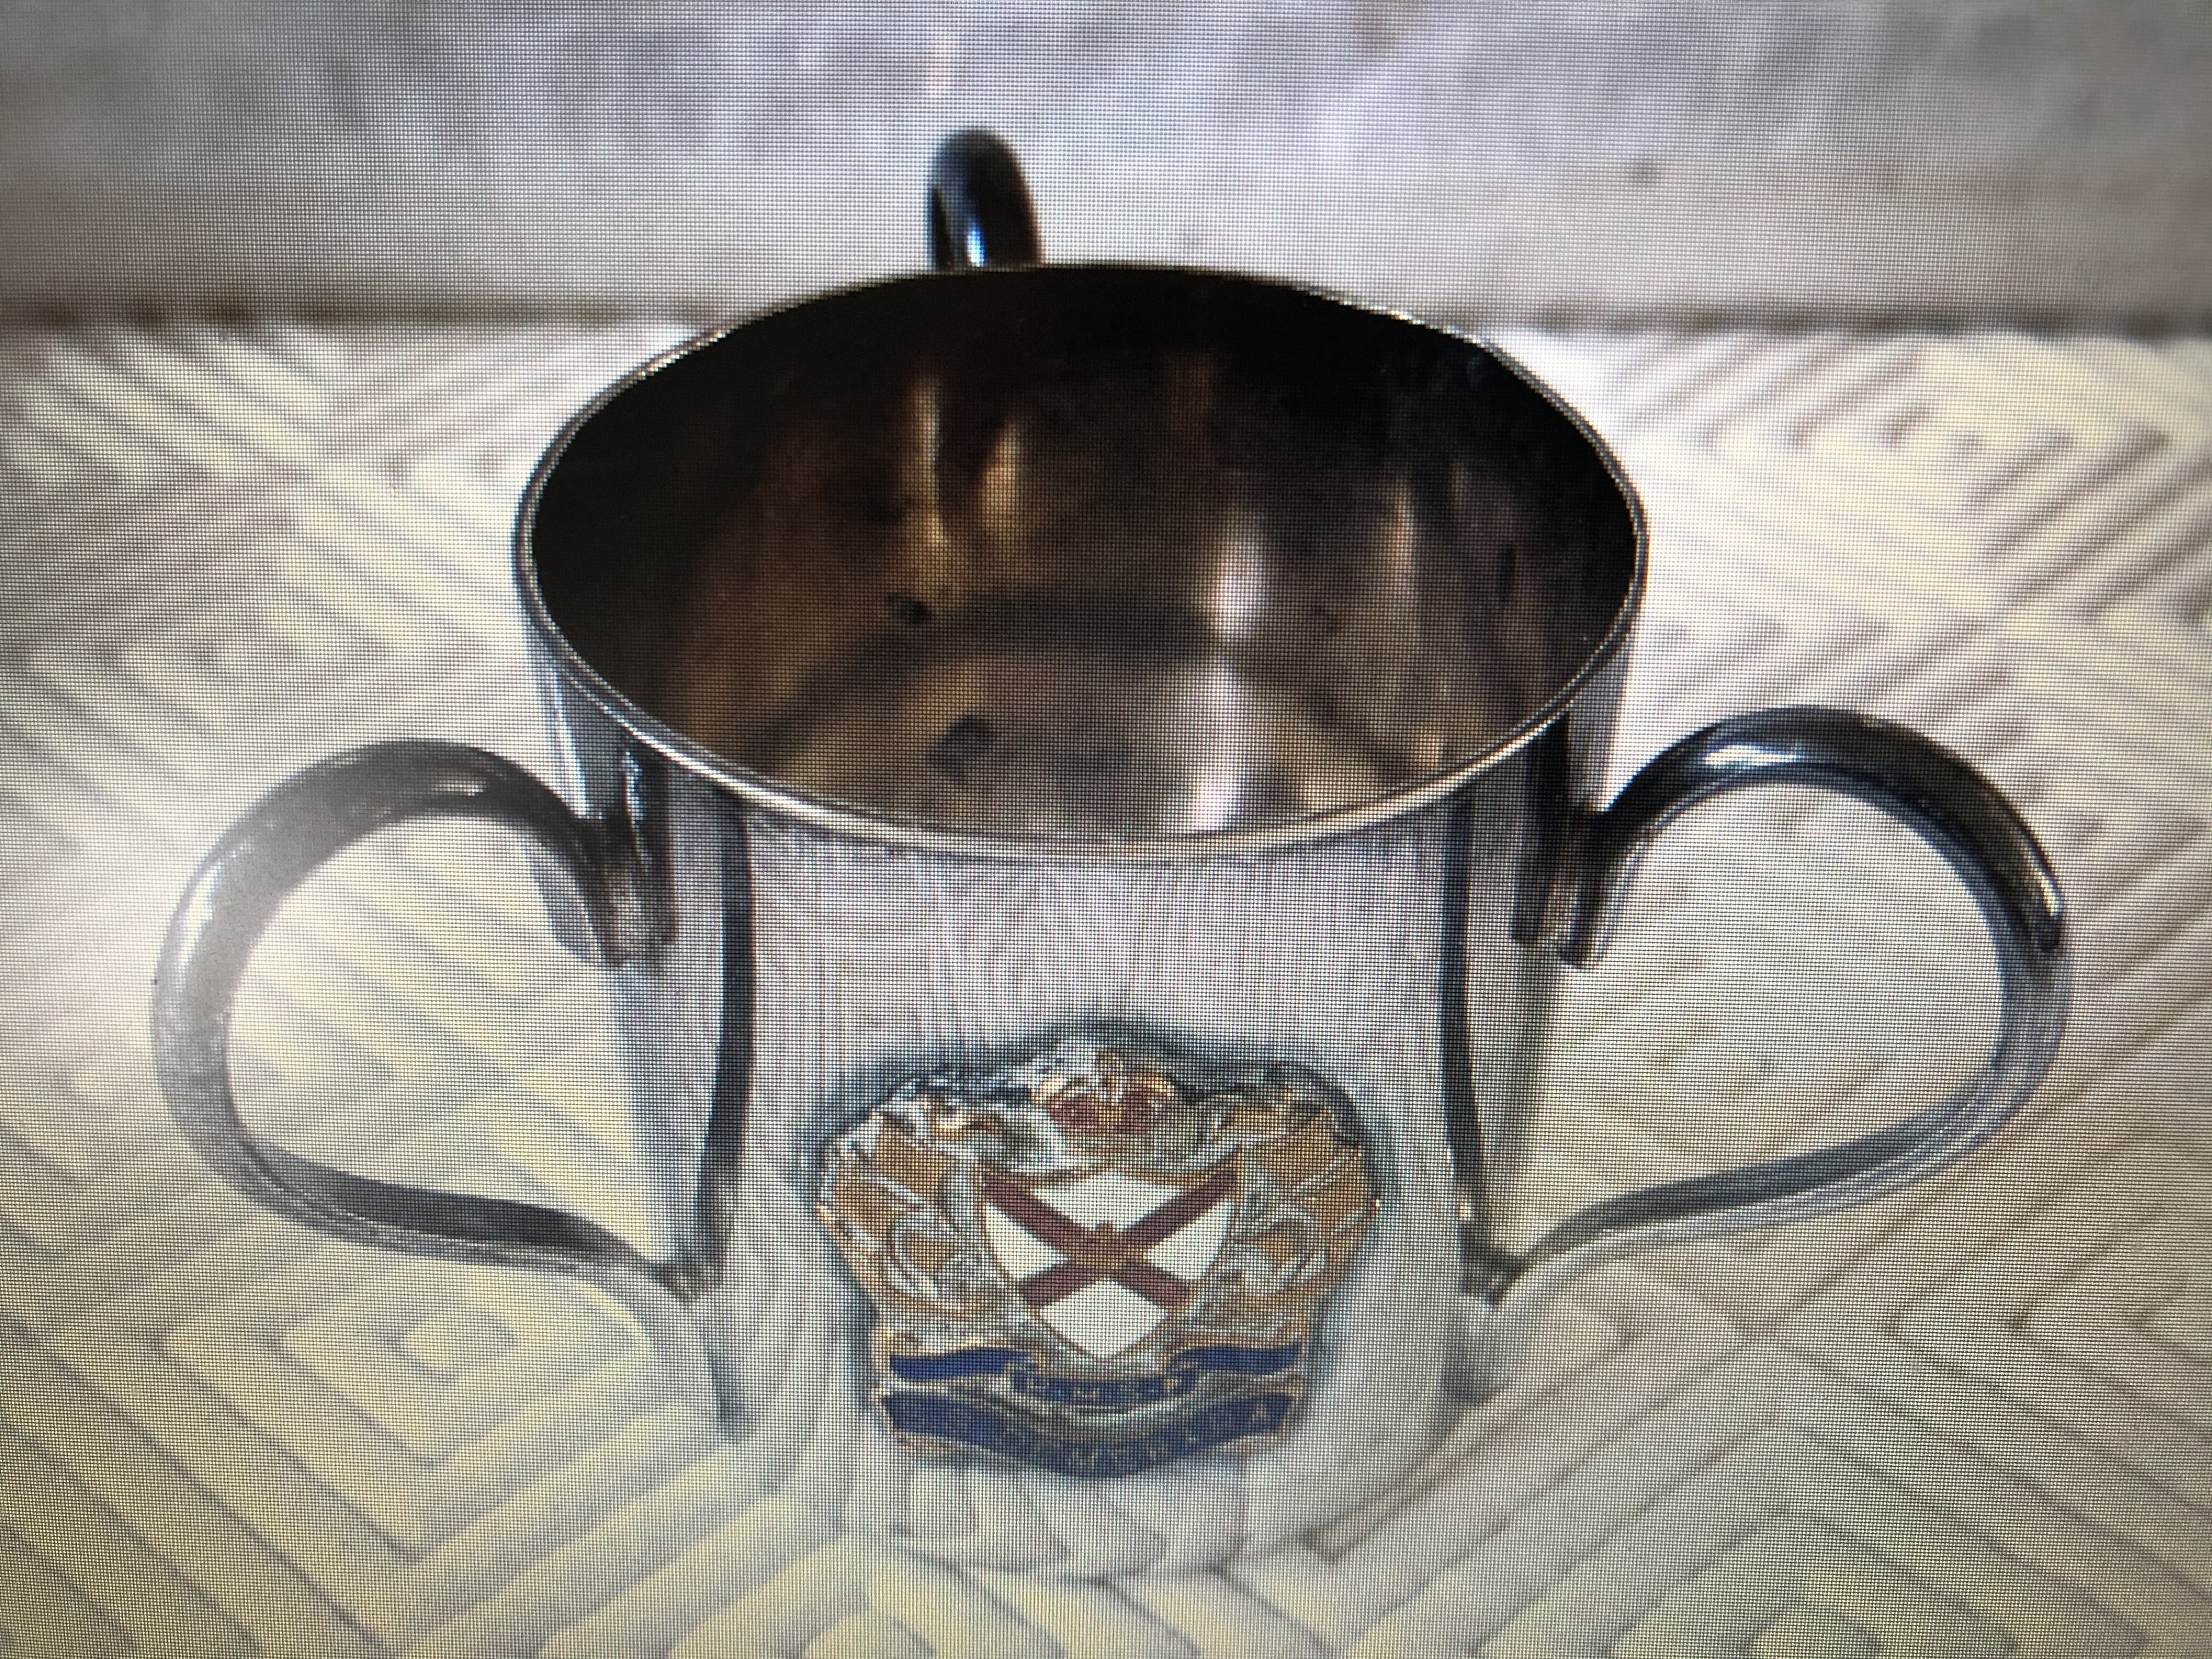 SILVER COLOURED TRI-HANDLE POT SOUVENIR FROM THE ROYAL MAIL LINE VESSEL THE SS DEMERARA